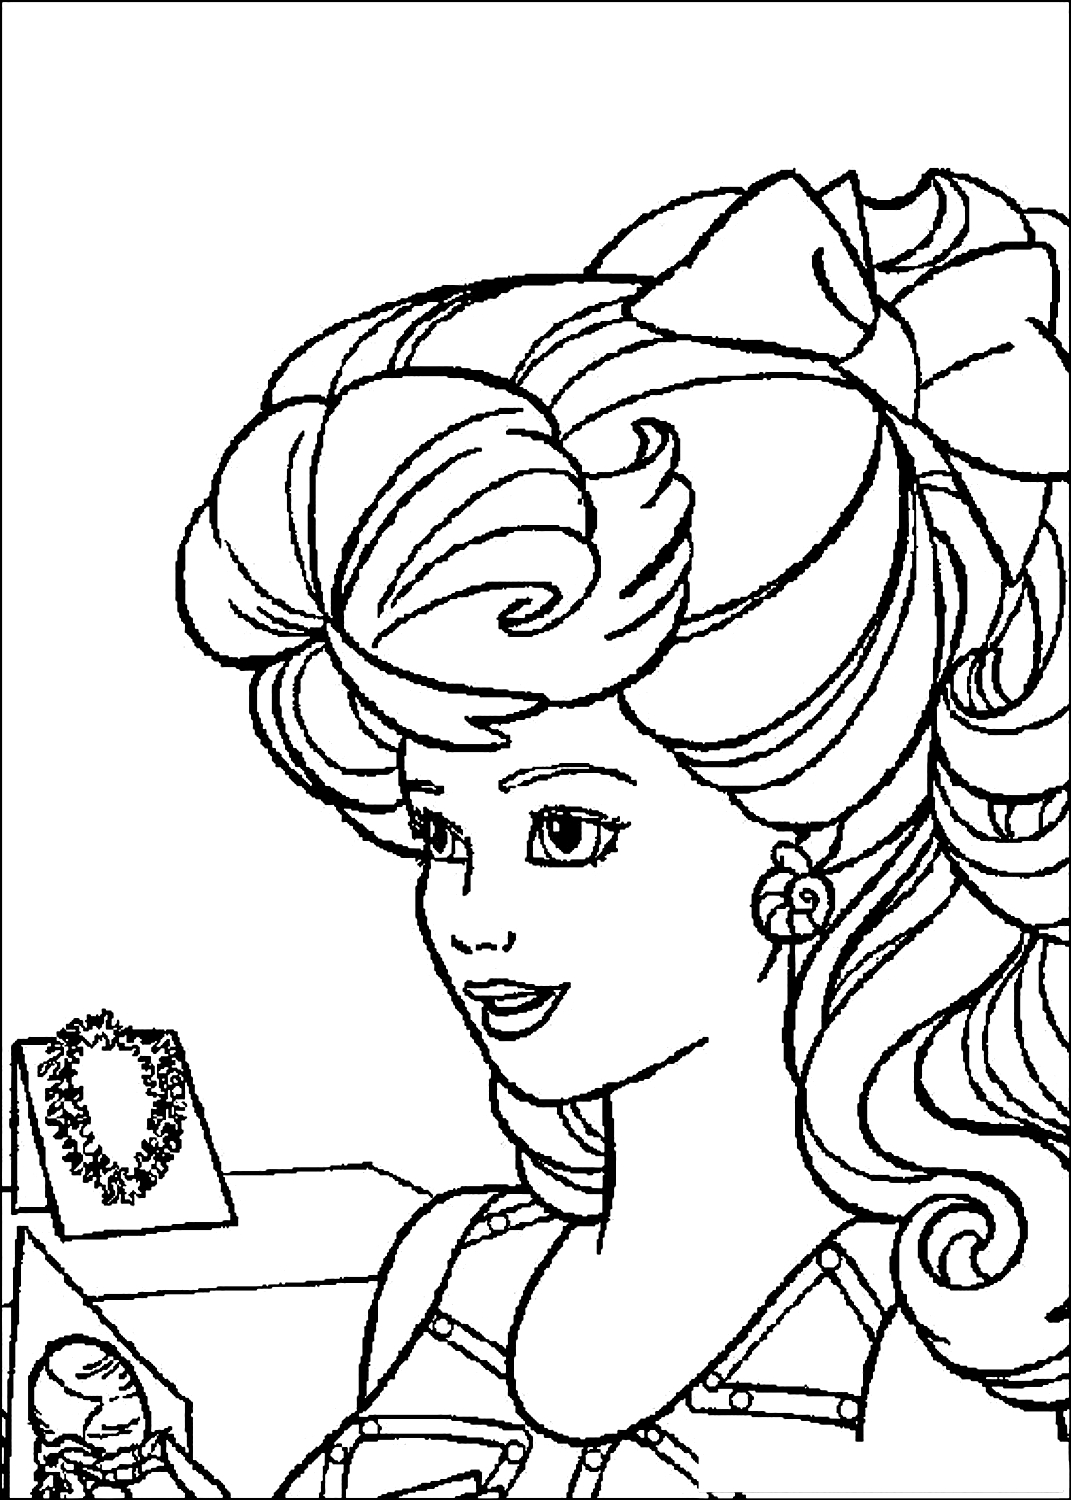 Barbie 20  coloring page to print and coloring